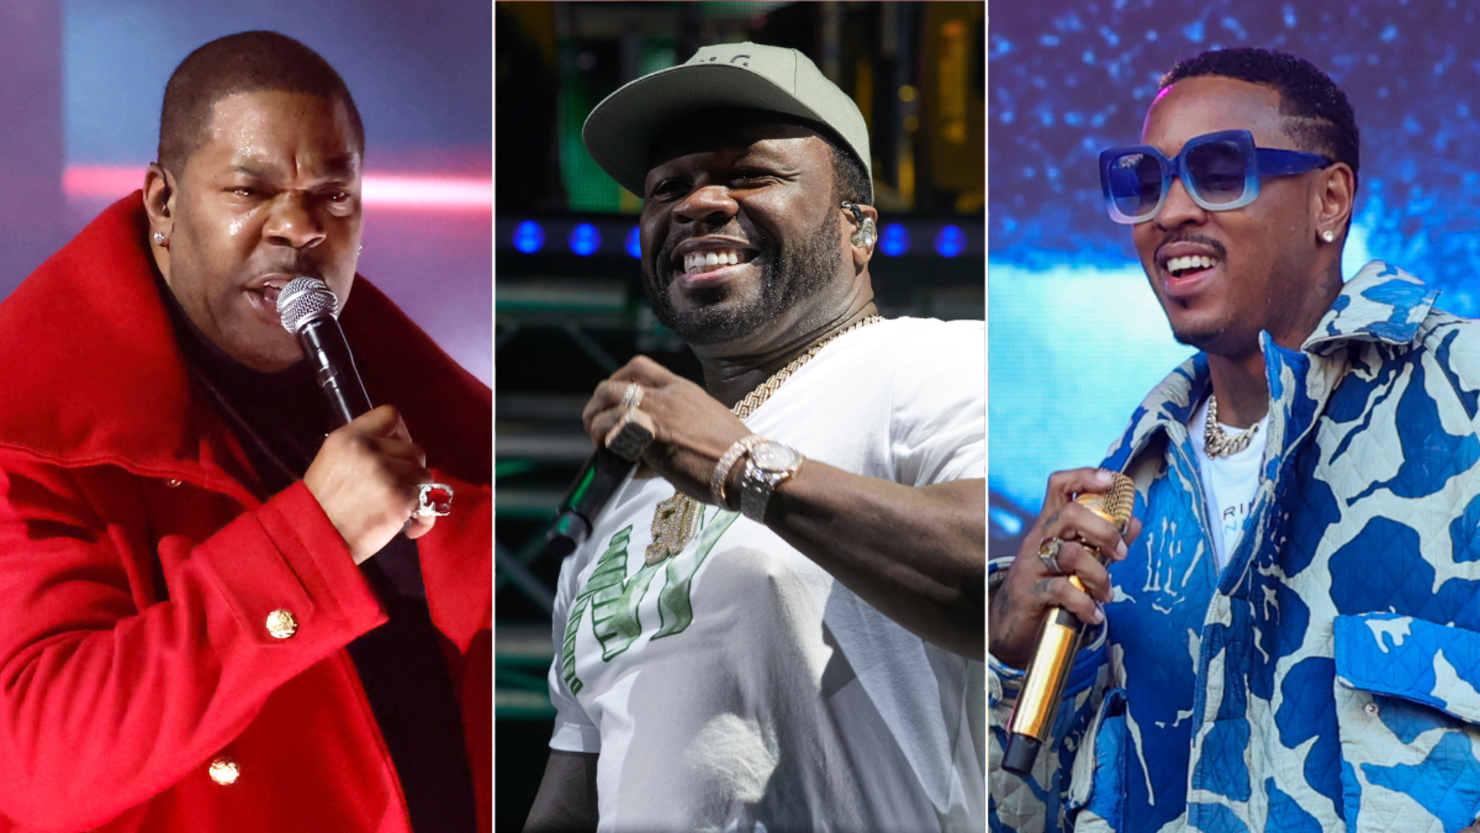 50 Cent Announces 'The Final Lap Tour 2023' With Busta Rhymes & Jeremih